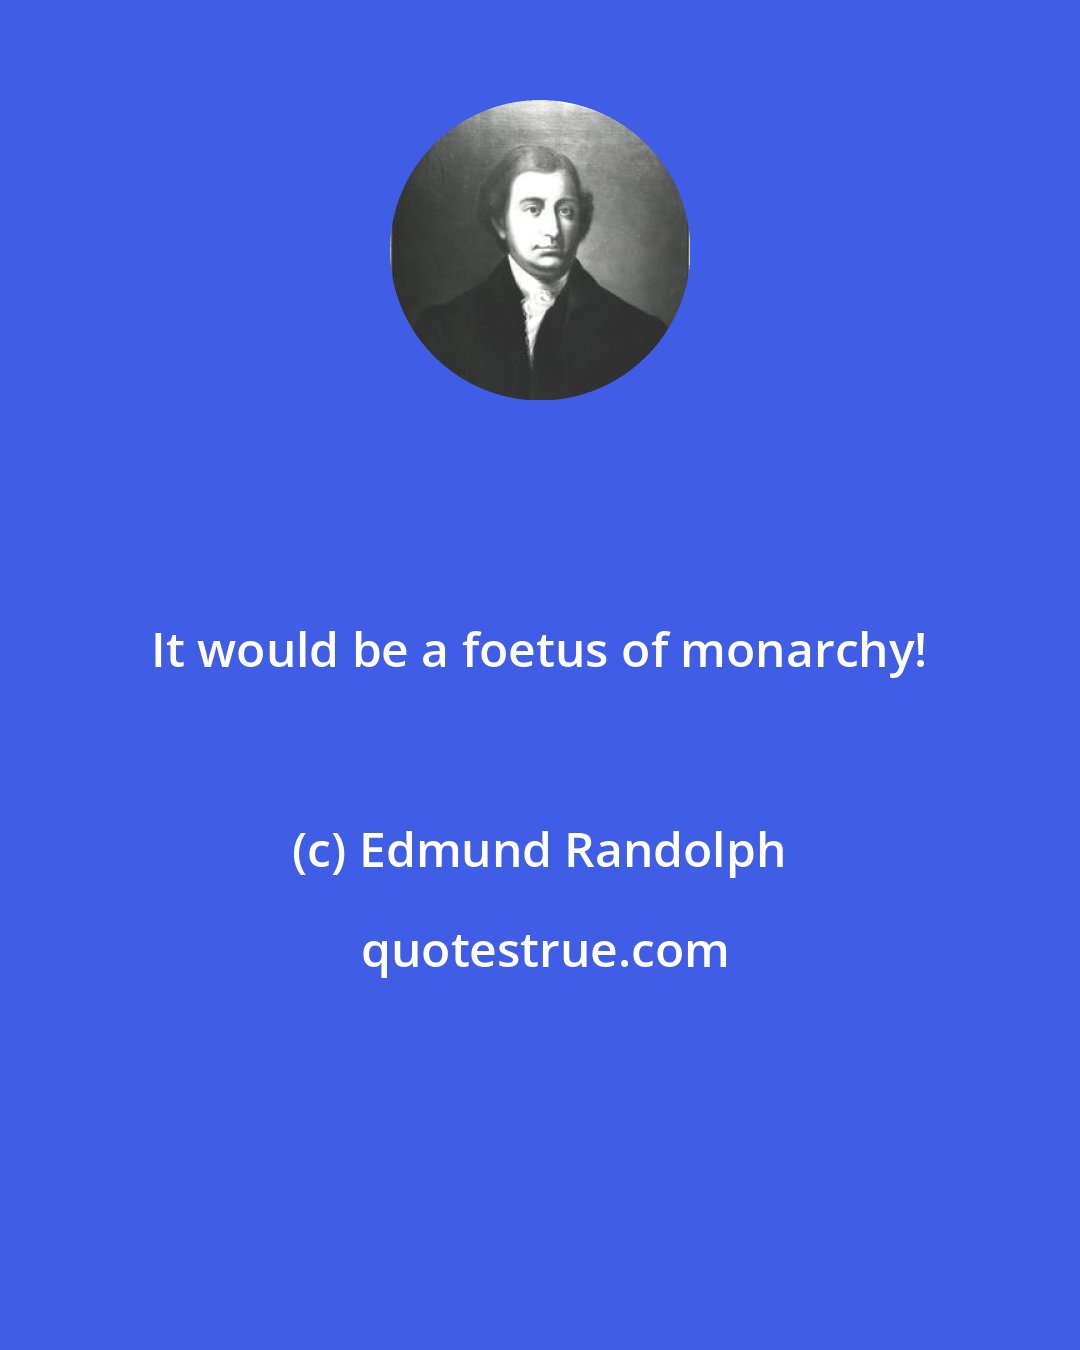 Edmund Randolph: It would be a foetus of monarchy!